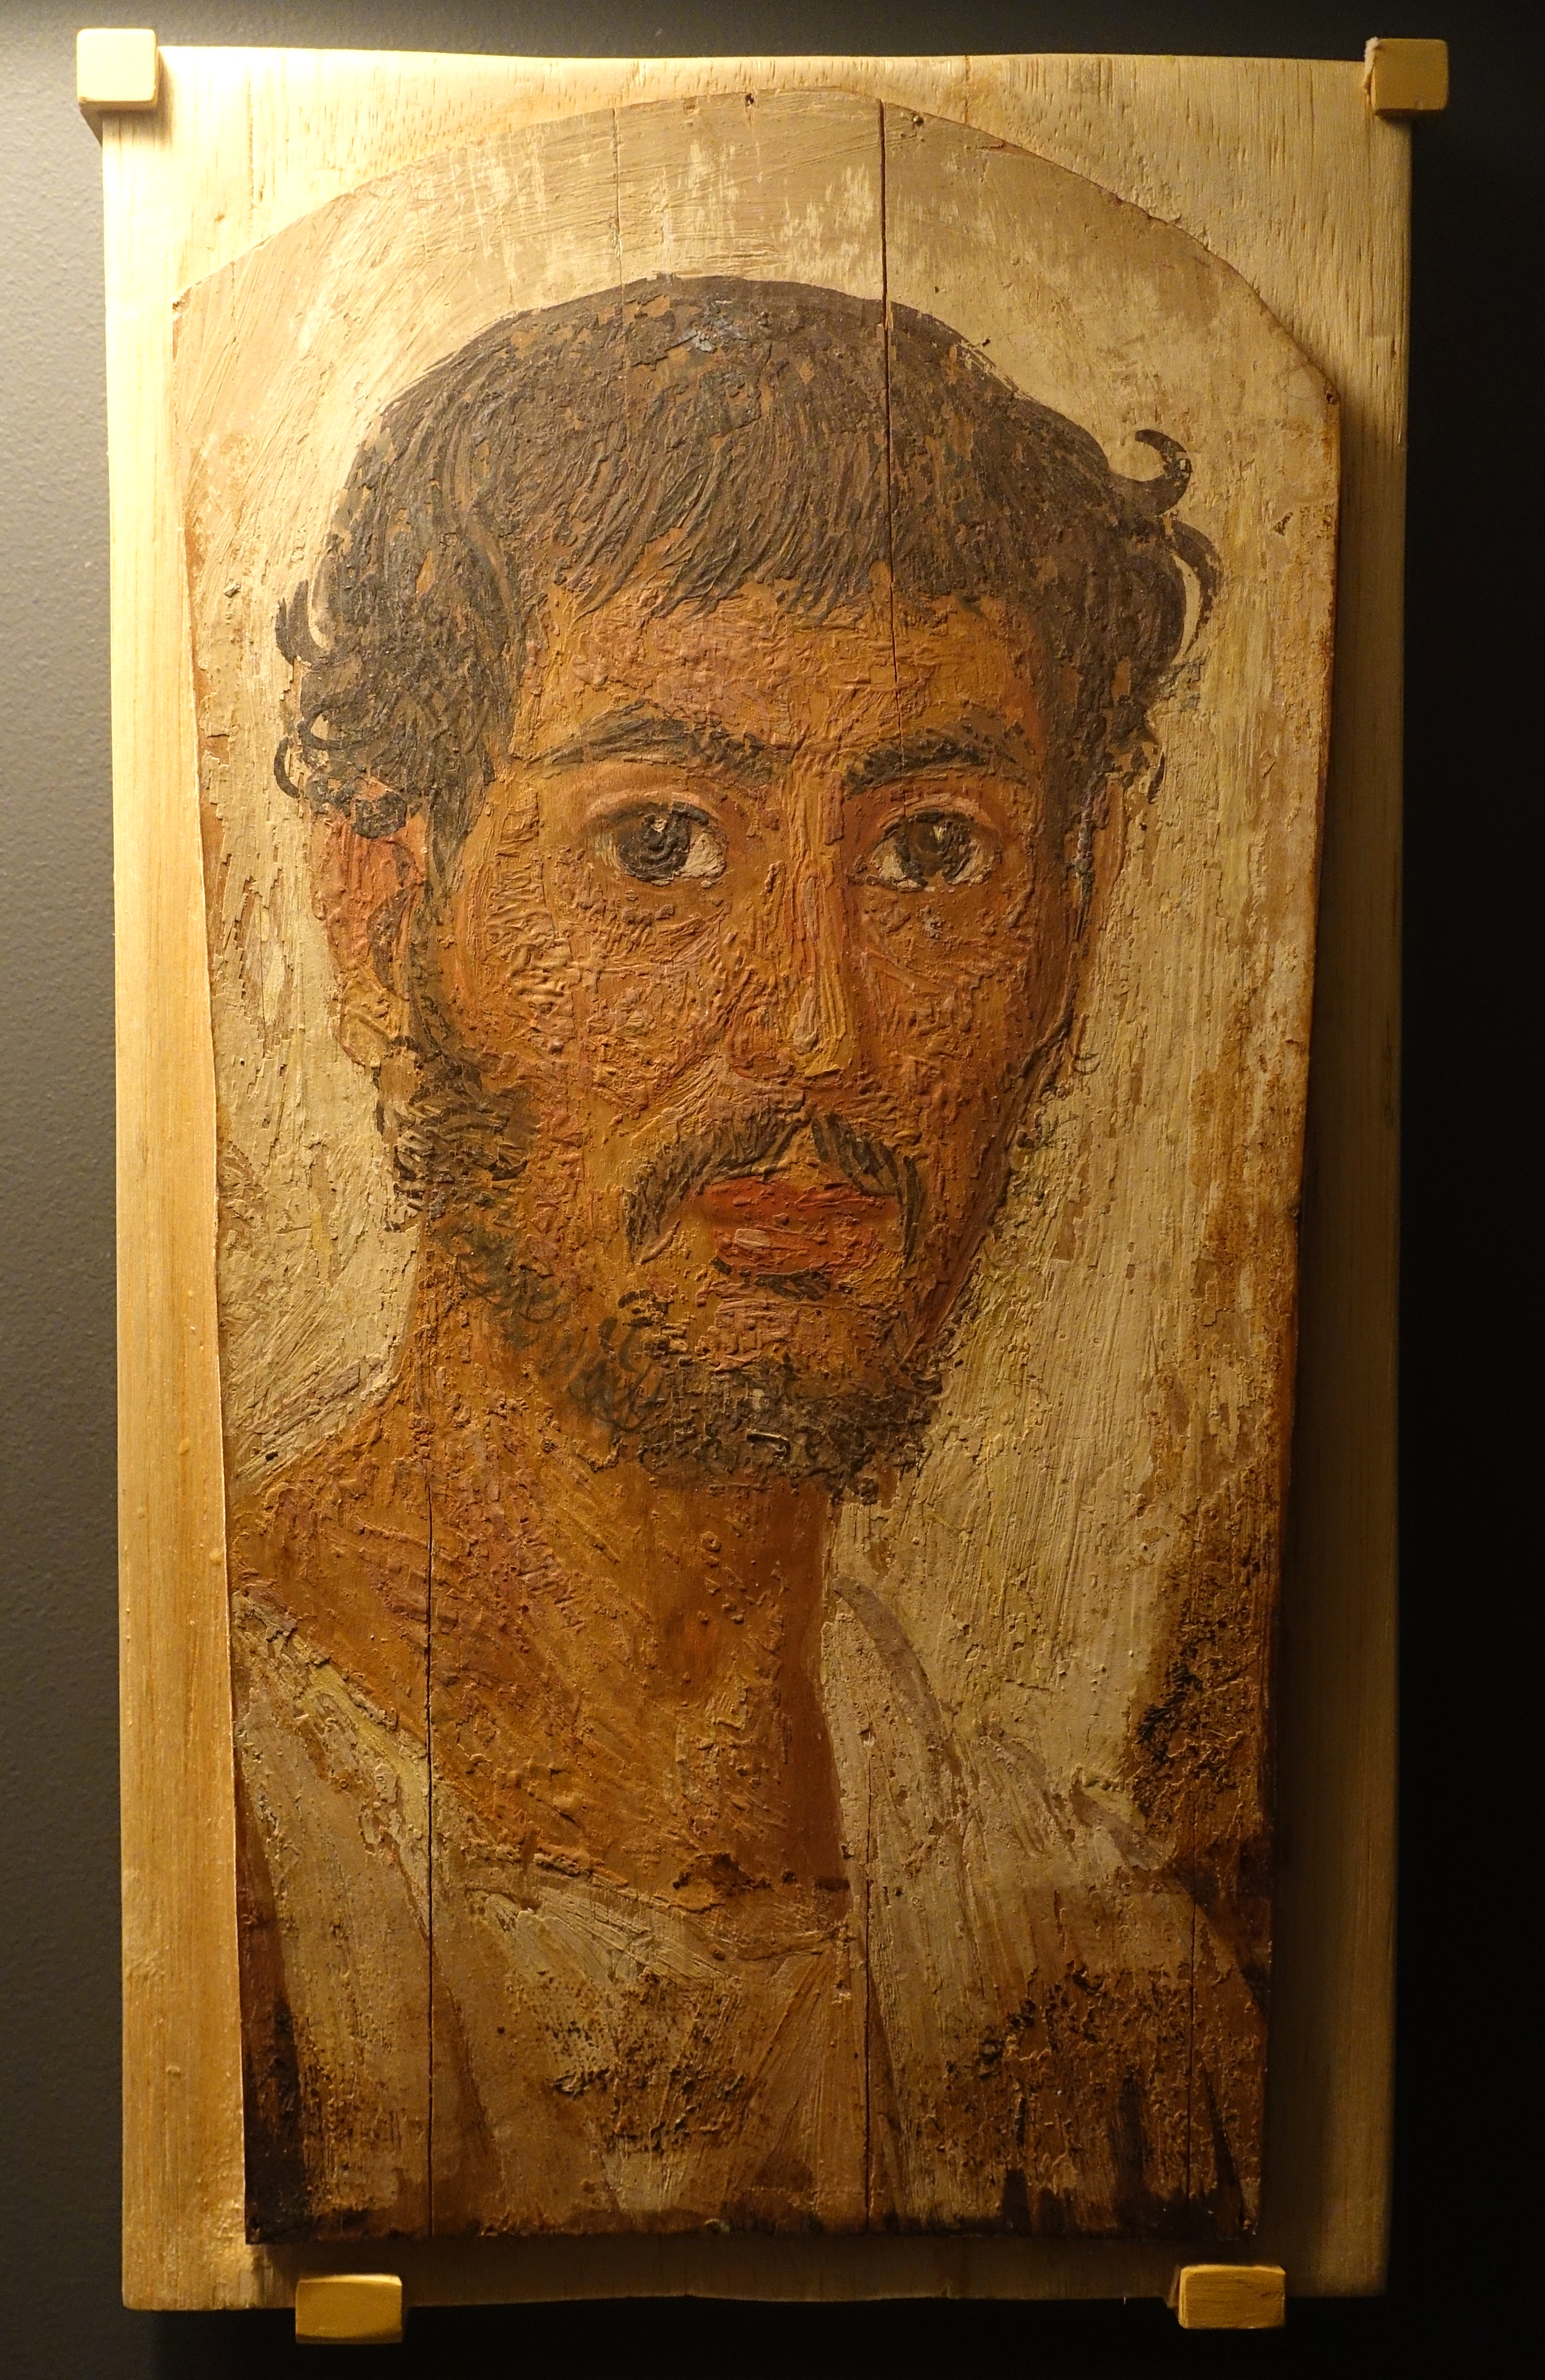 Fayum mummy portrait, Fayum agricultural region, 50-200 AD - National Museum of Natural History, United States - DSC00553